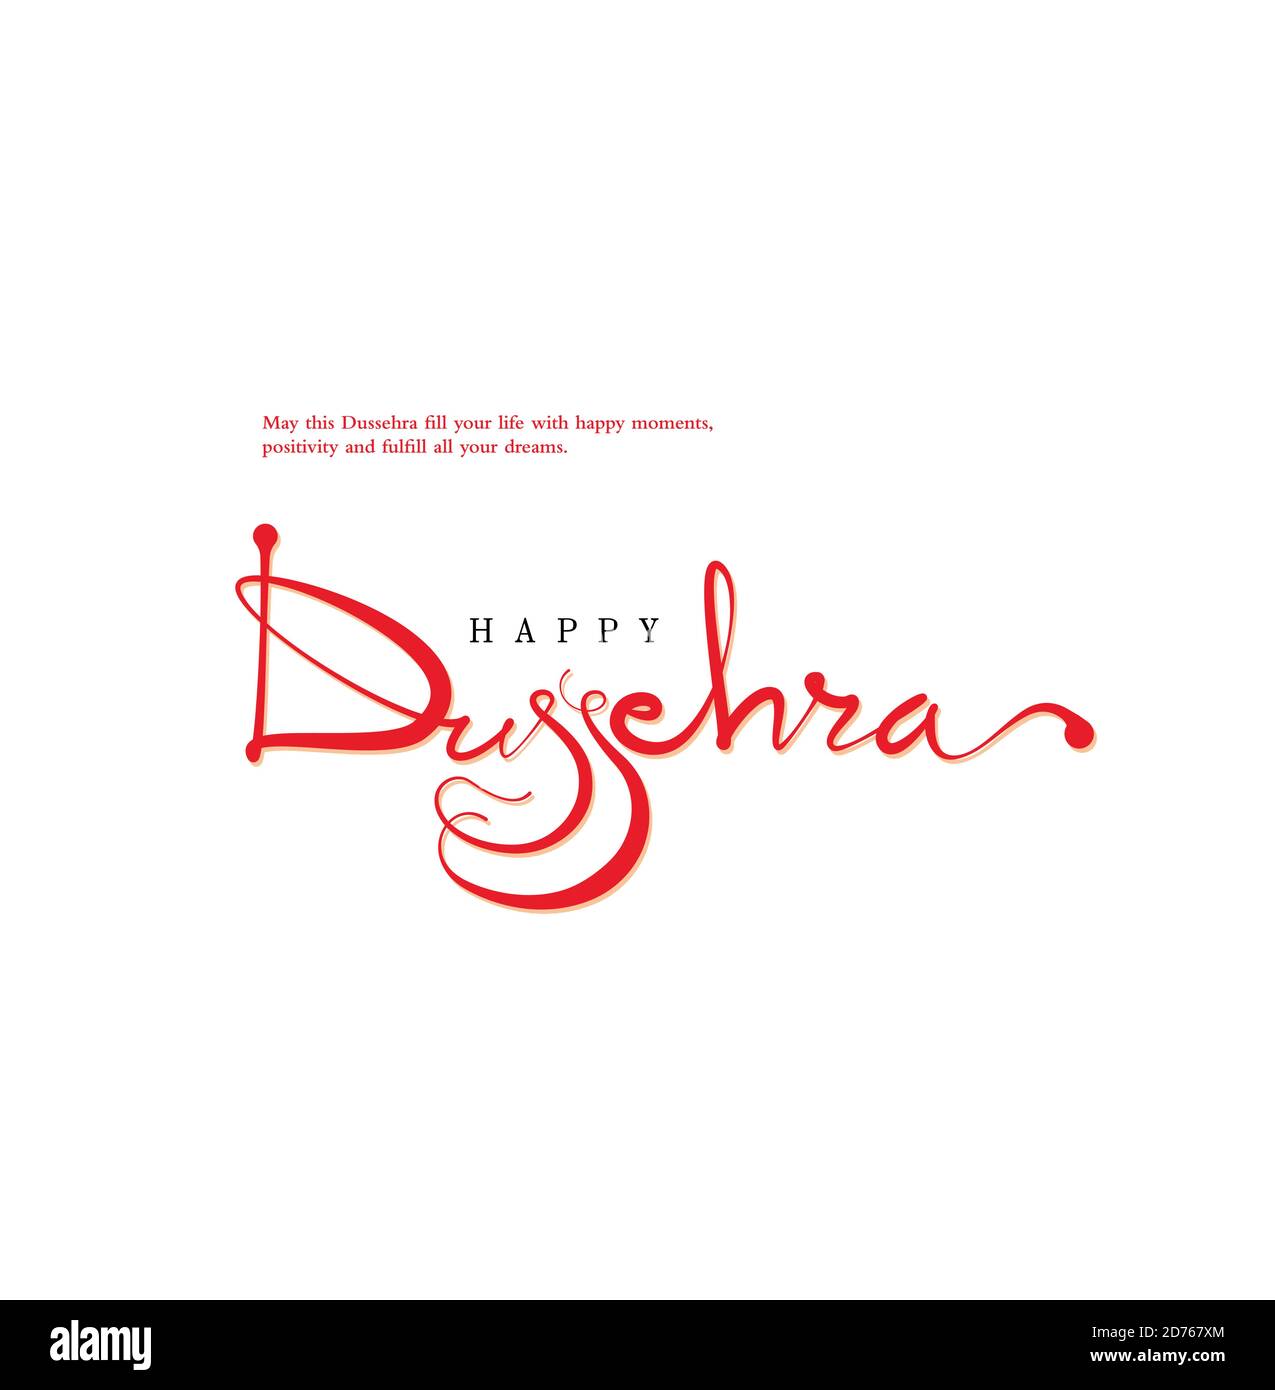 Happy Dussehra greetings by calligraphy lettering on white background. Dussehra is a Indian Festival. Stock Vector